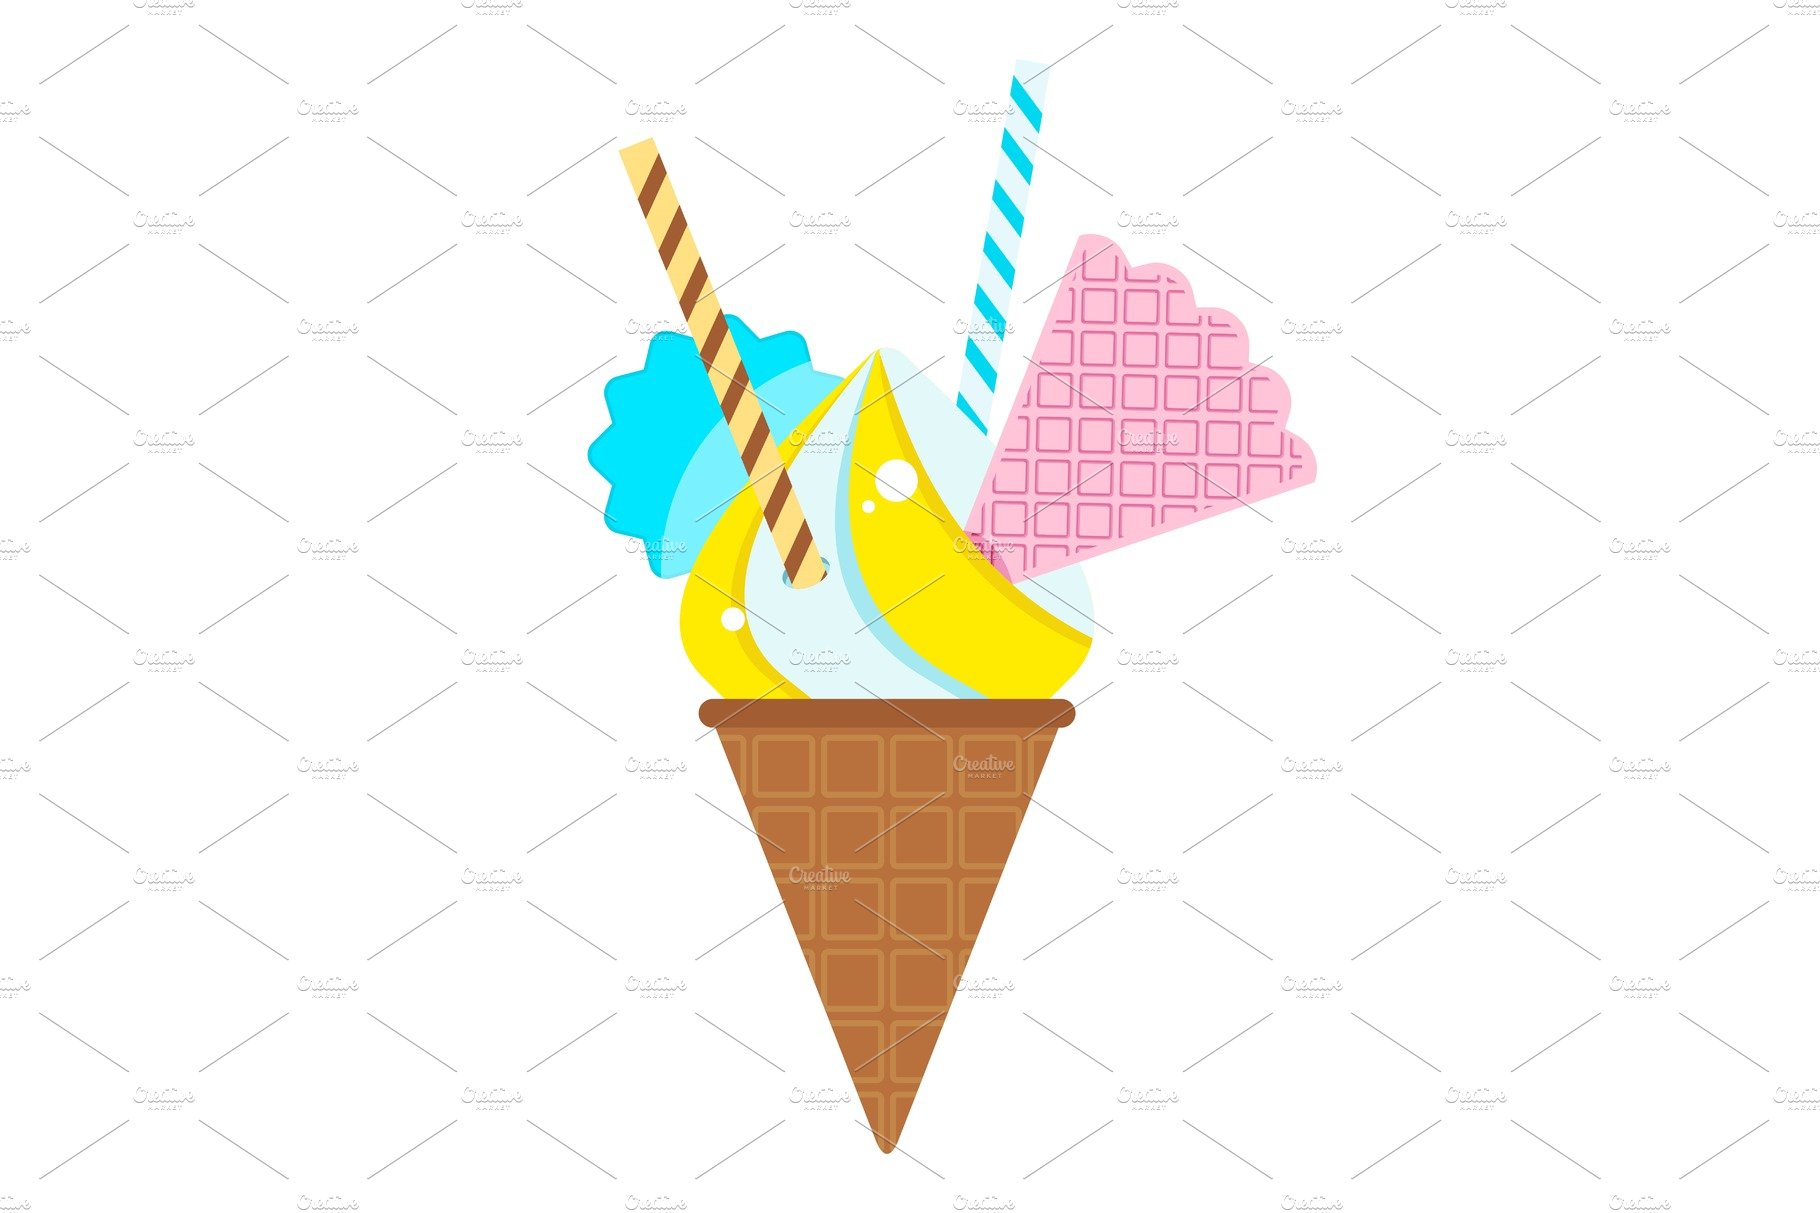 icecream with sweets cover image.